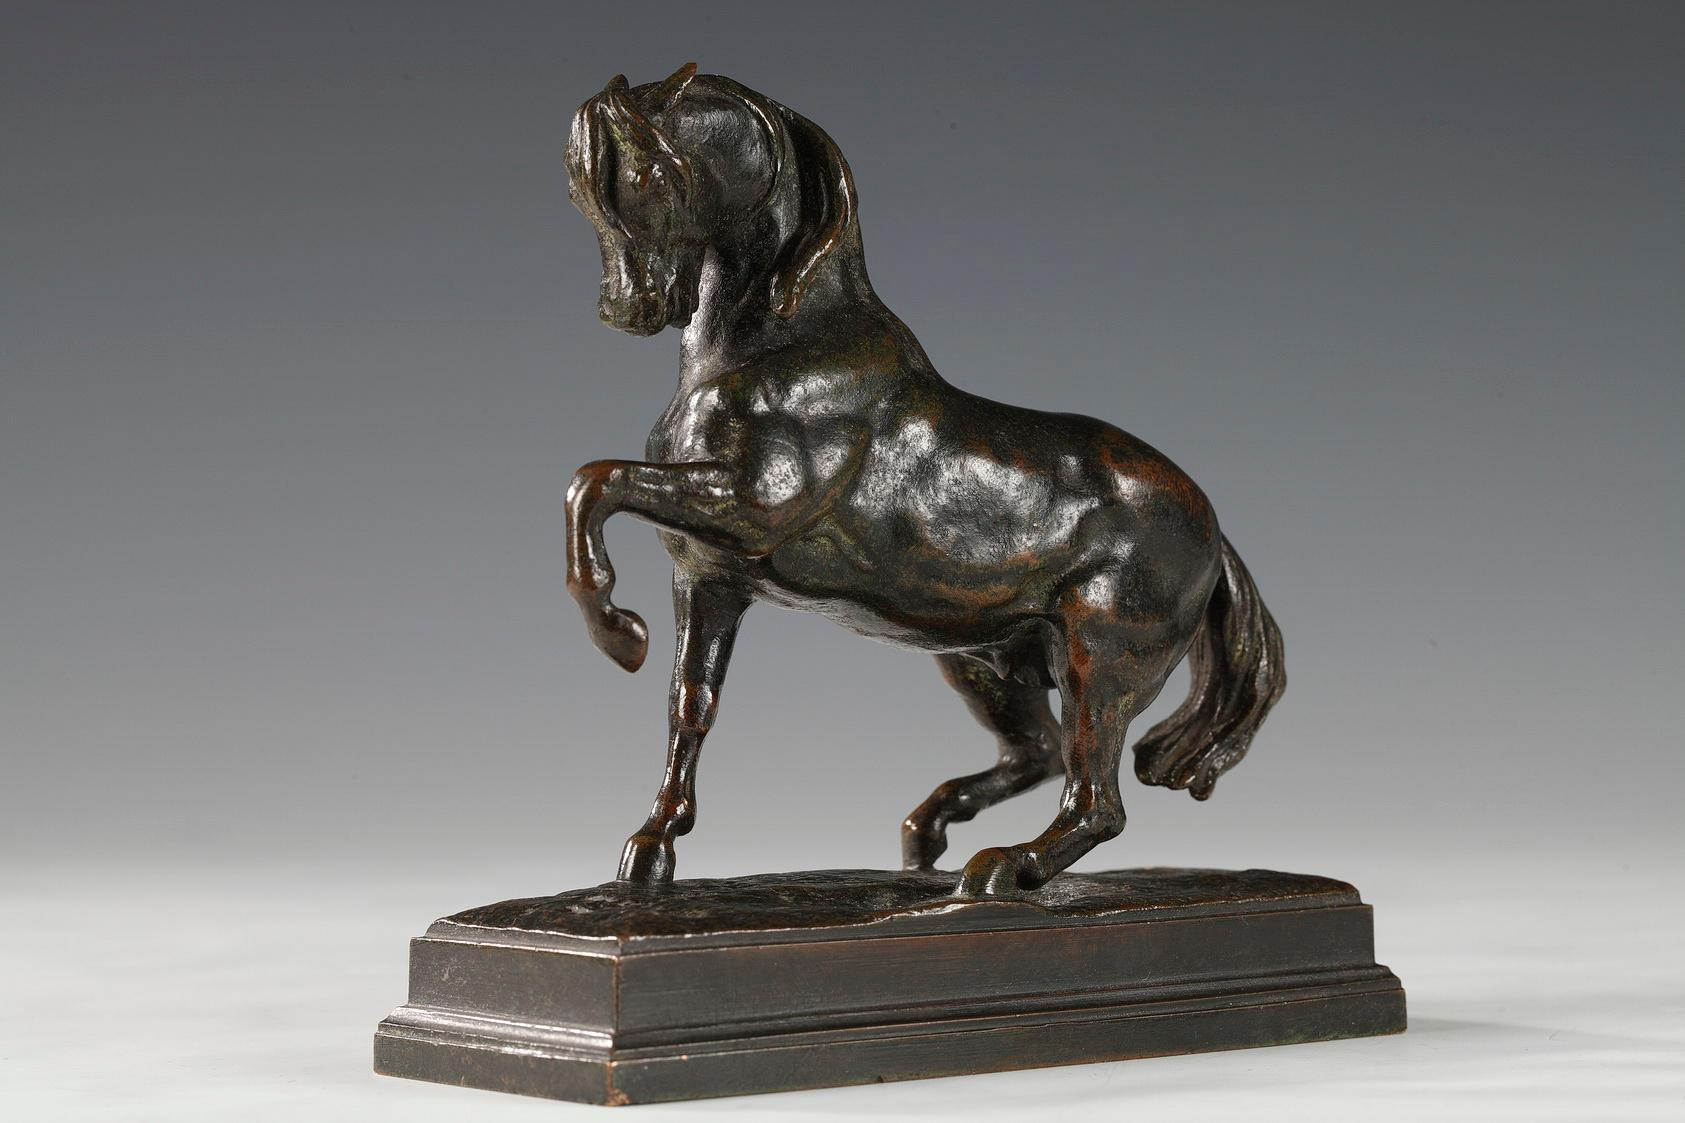 Green patina bronze of a horse with left foreleg raised on rectangular base. The cast is signed BARYE and inscribed by the founders F. BARBEDIENNE. FONDEUR. The powerful modelling of the animal reflects his strength.

This is a smaller reproduction